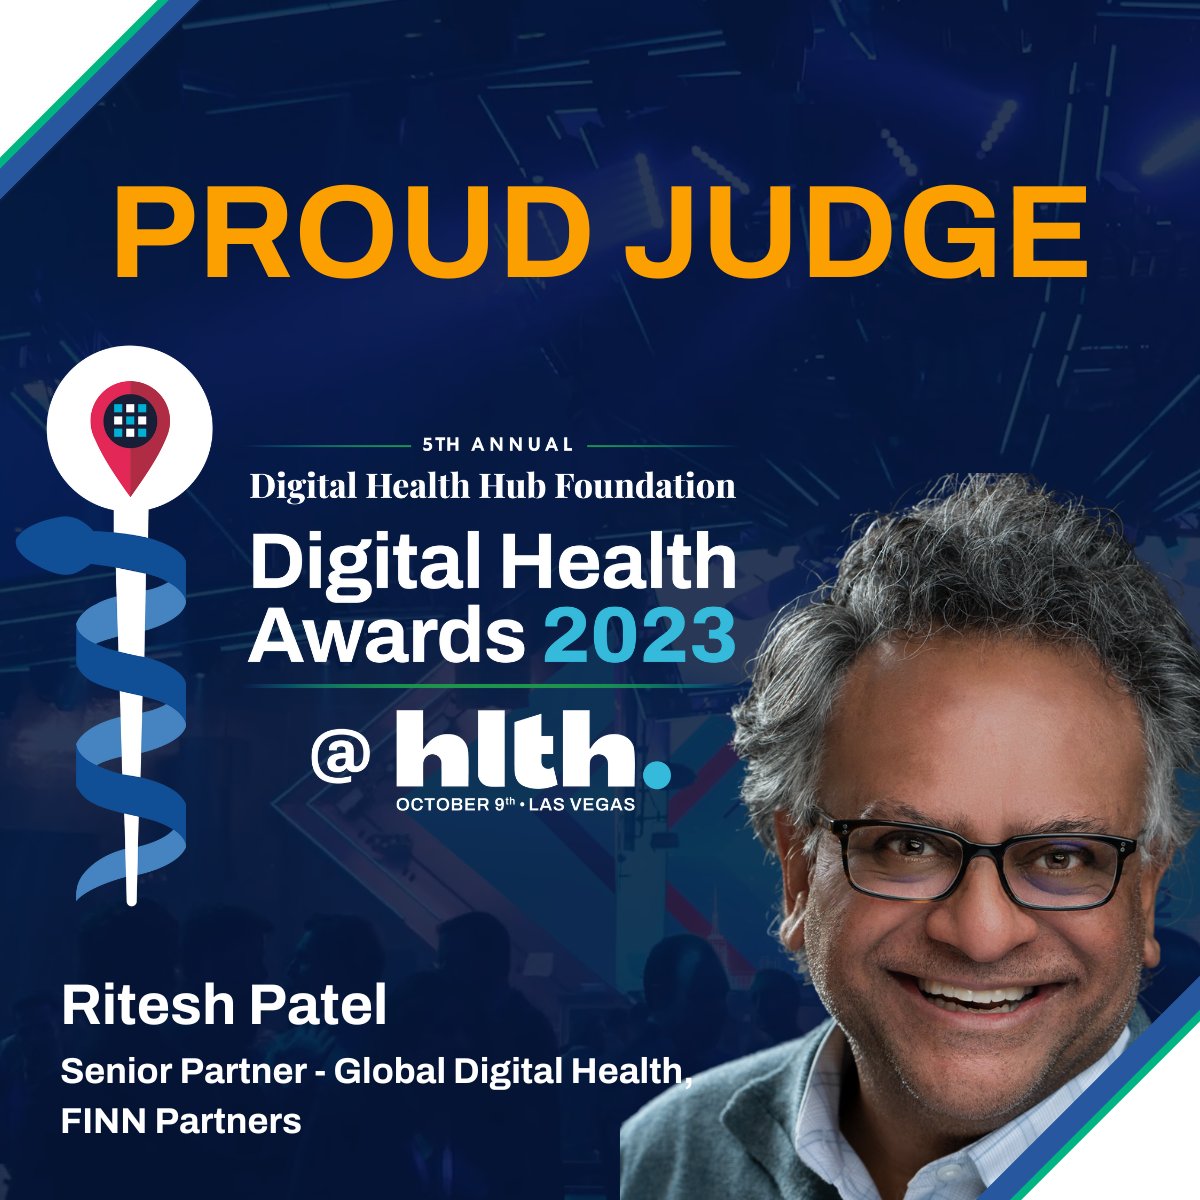 I am so proud to be a judge for The Digital Health Foundation Digital Health Awards, the biggest healthcare award show in the world held at HLTH!  Here are all of the categories: digitalhealthhub.org/awards/2023/20… Don't miss the award ceremony Oct 9th! #hlth23 #digitalhealth #health